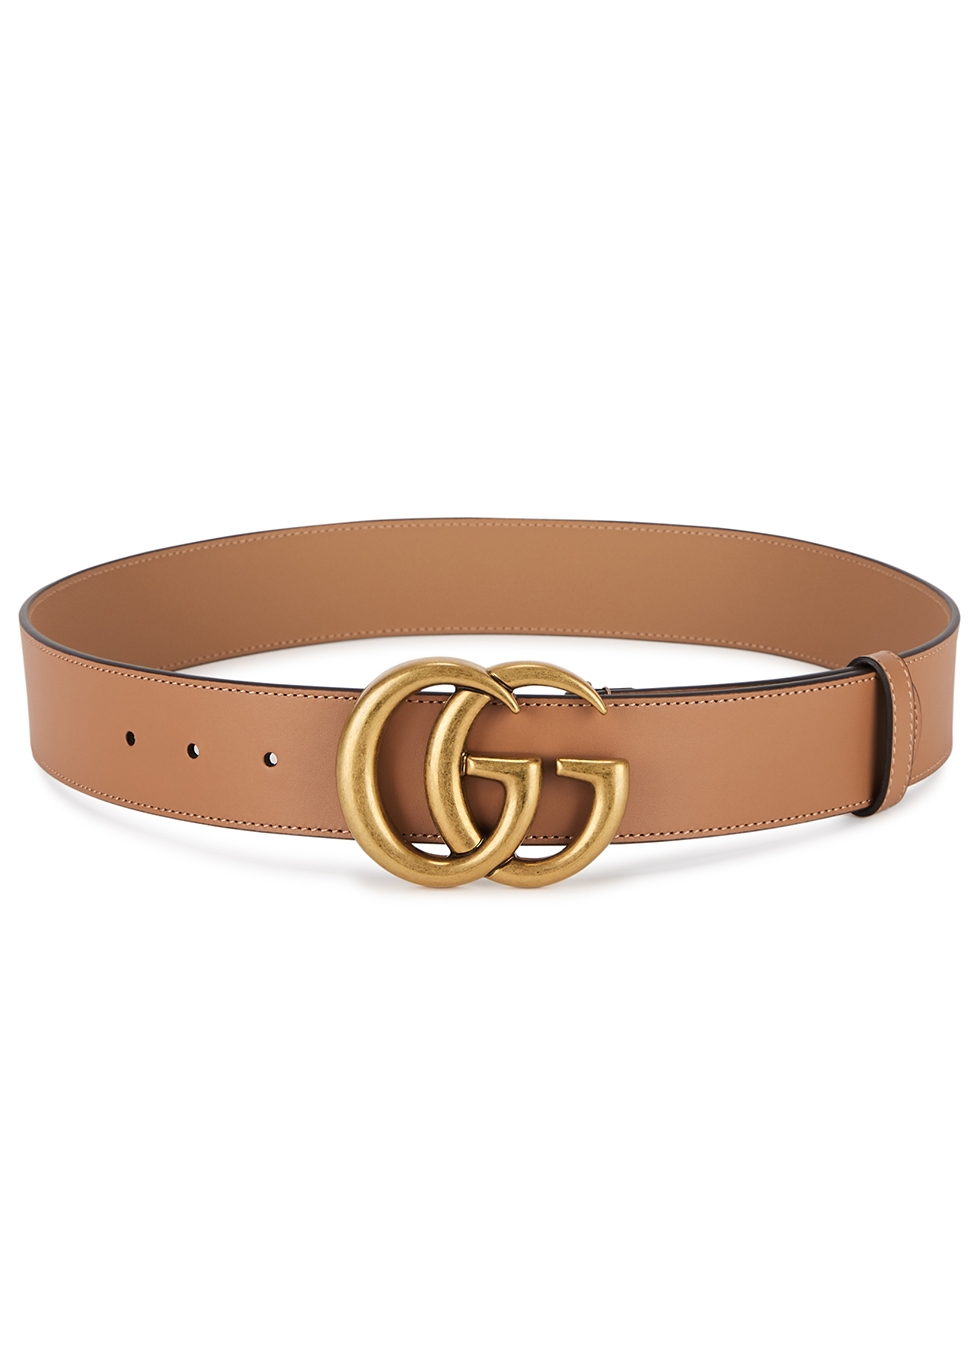 Gucci GG brown leather belt - Harvey 